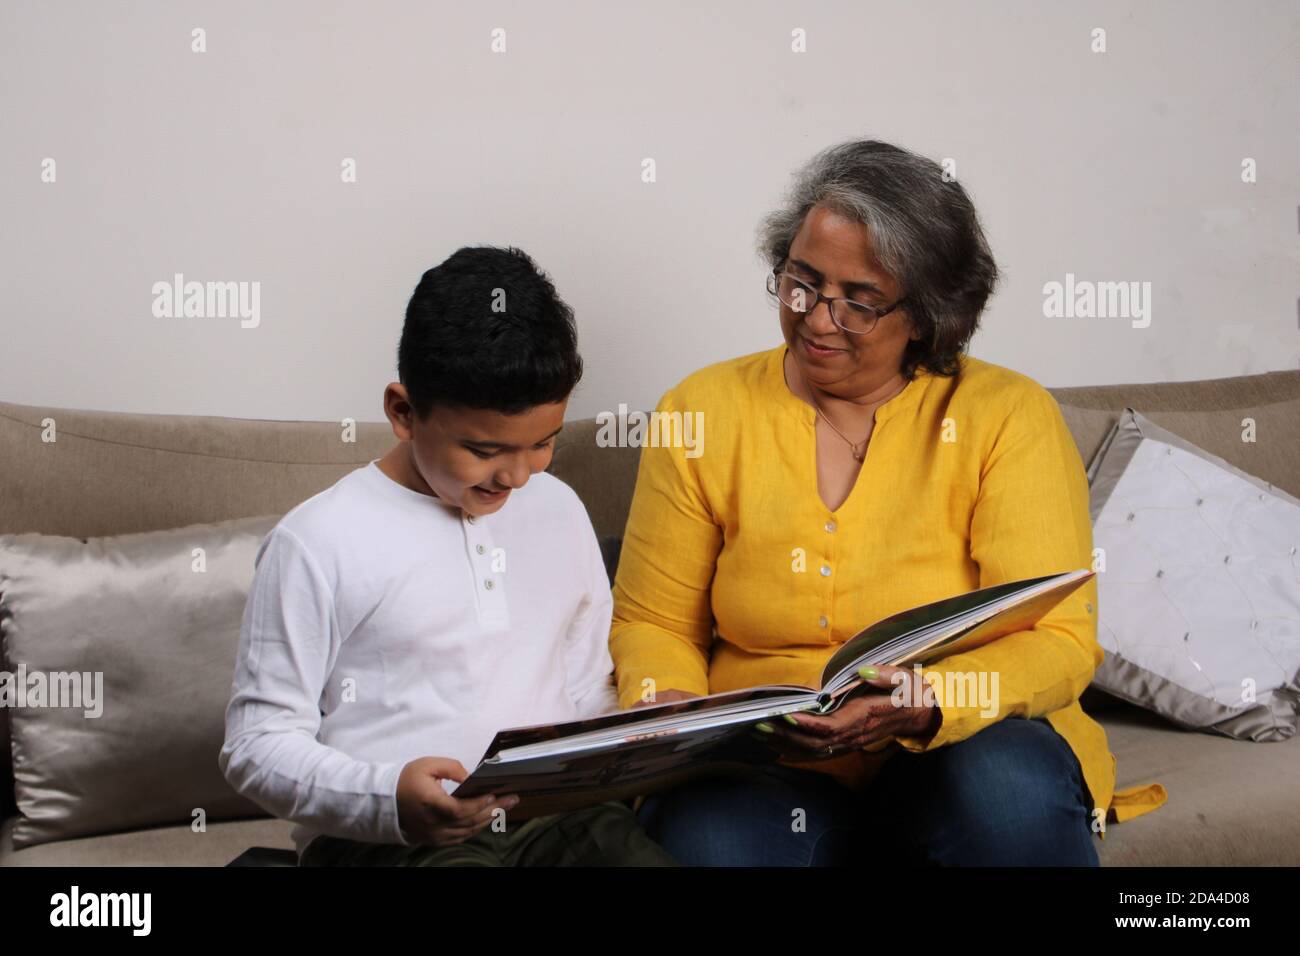 Happy moments with grandma, indian/asian senior lady spending quality time with her grand son reading book together. Stock Photo